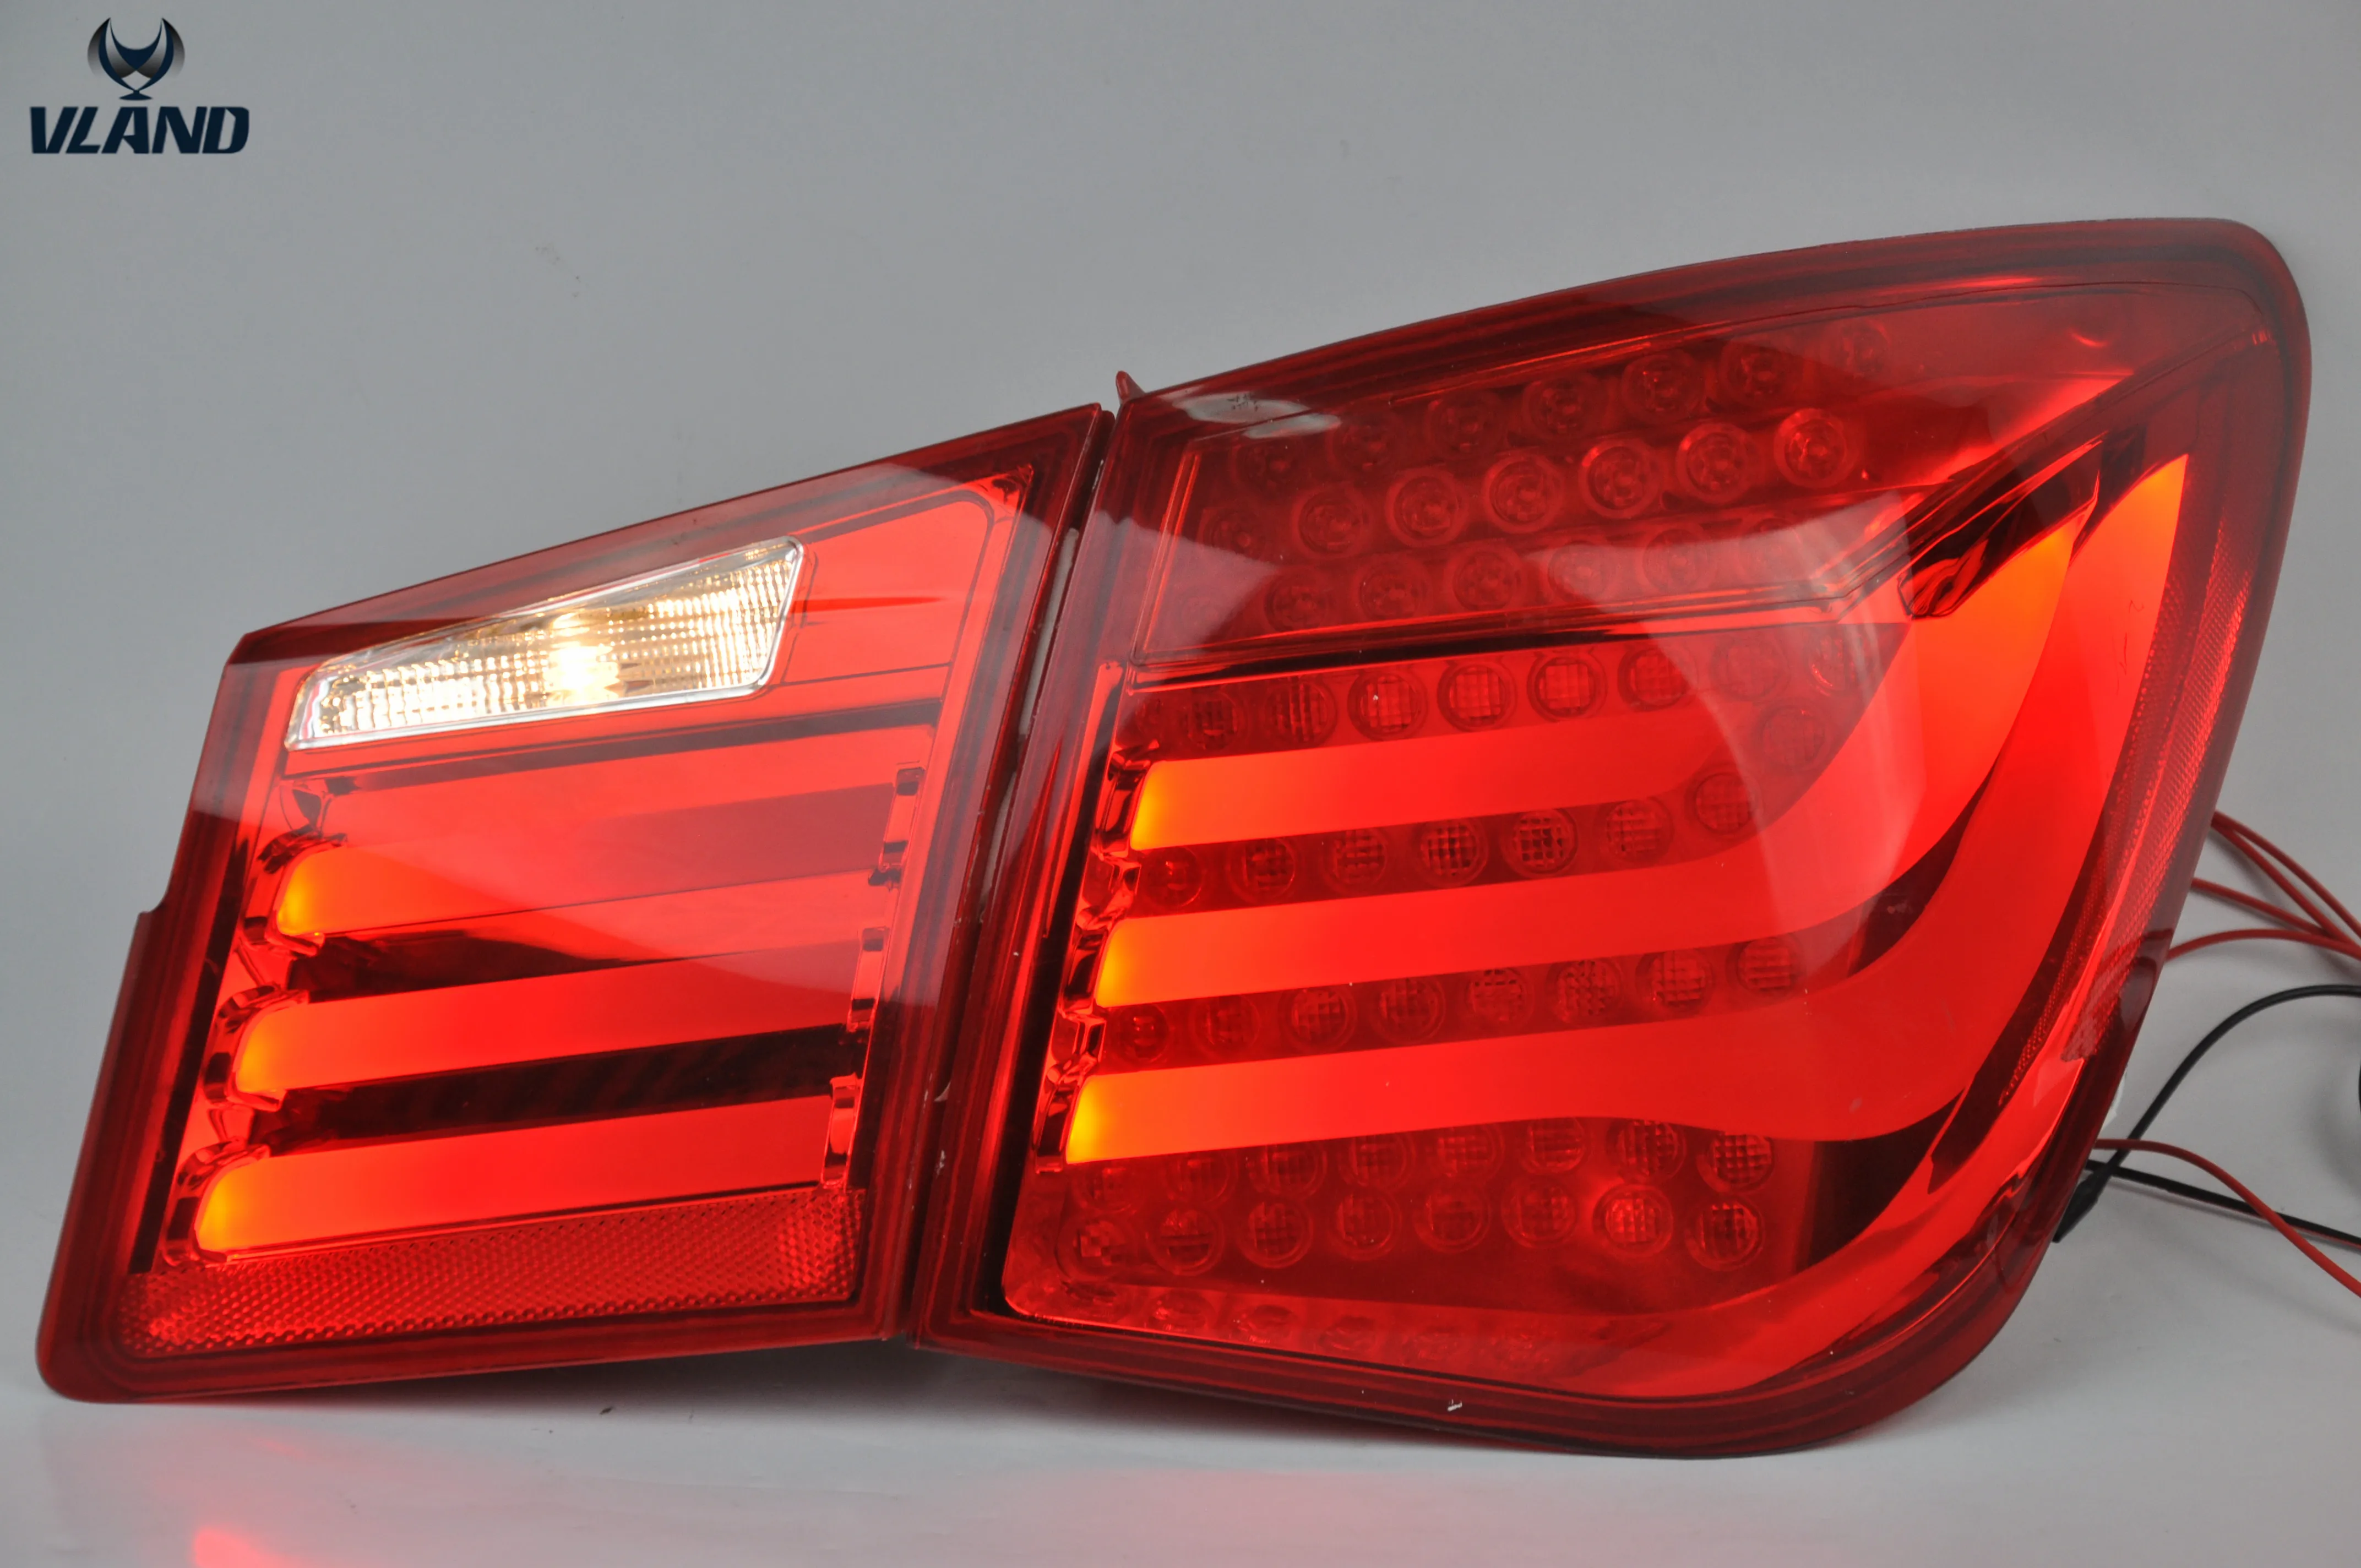 VLAND Factory accessory cruze car tail light for Chevrolet Cruze taillight for 2010-2014 with LED DRL